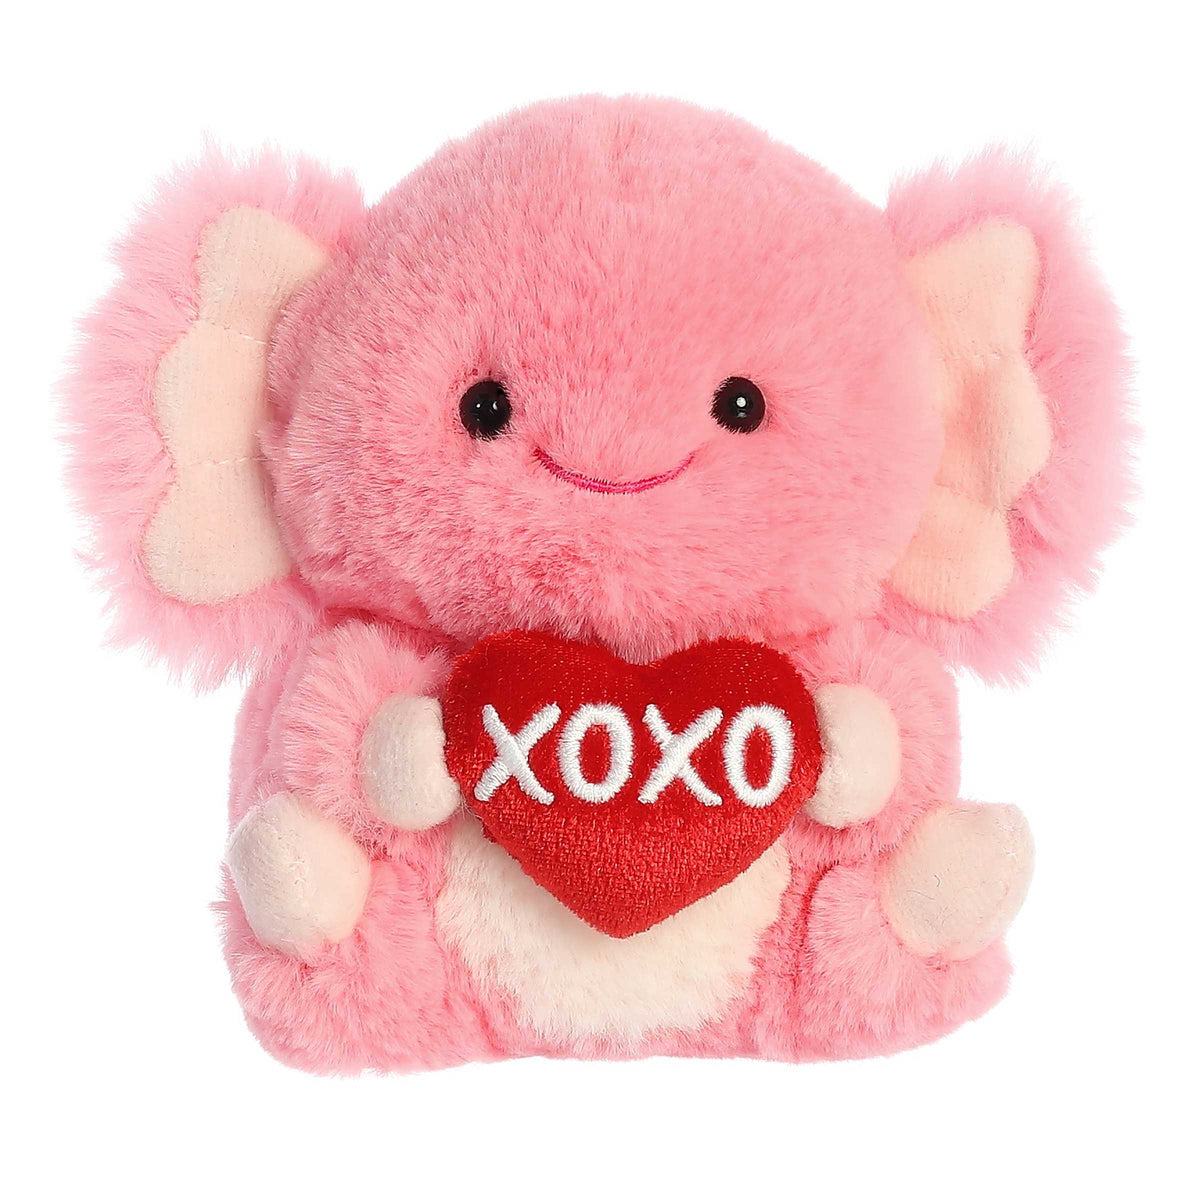 Adorable pink Axolotl plush from Rolly Pets, holding a Ã¢â‚¬ËœXOXO' heart, ready for cuddles and Valentine's Day